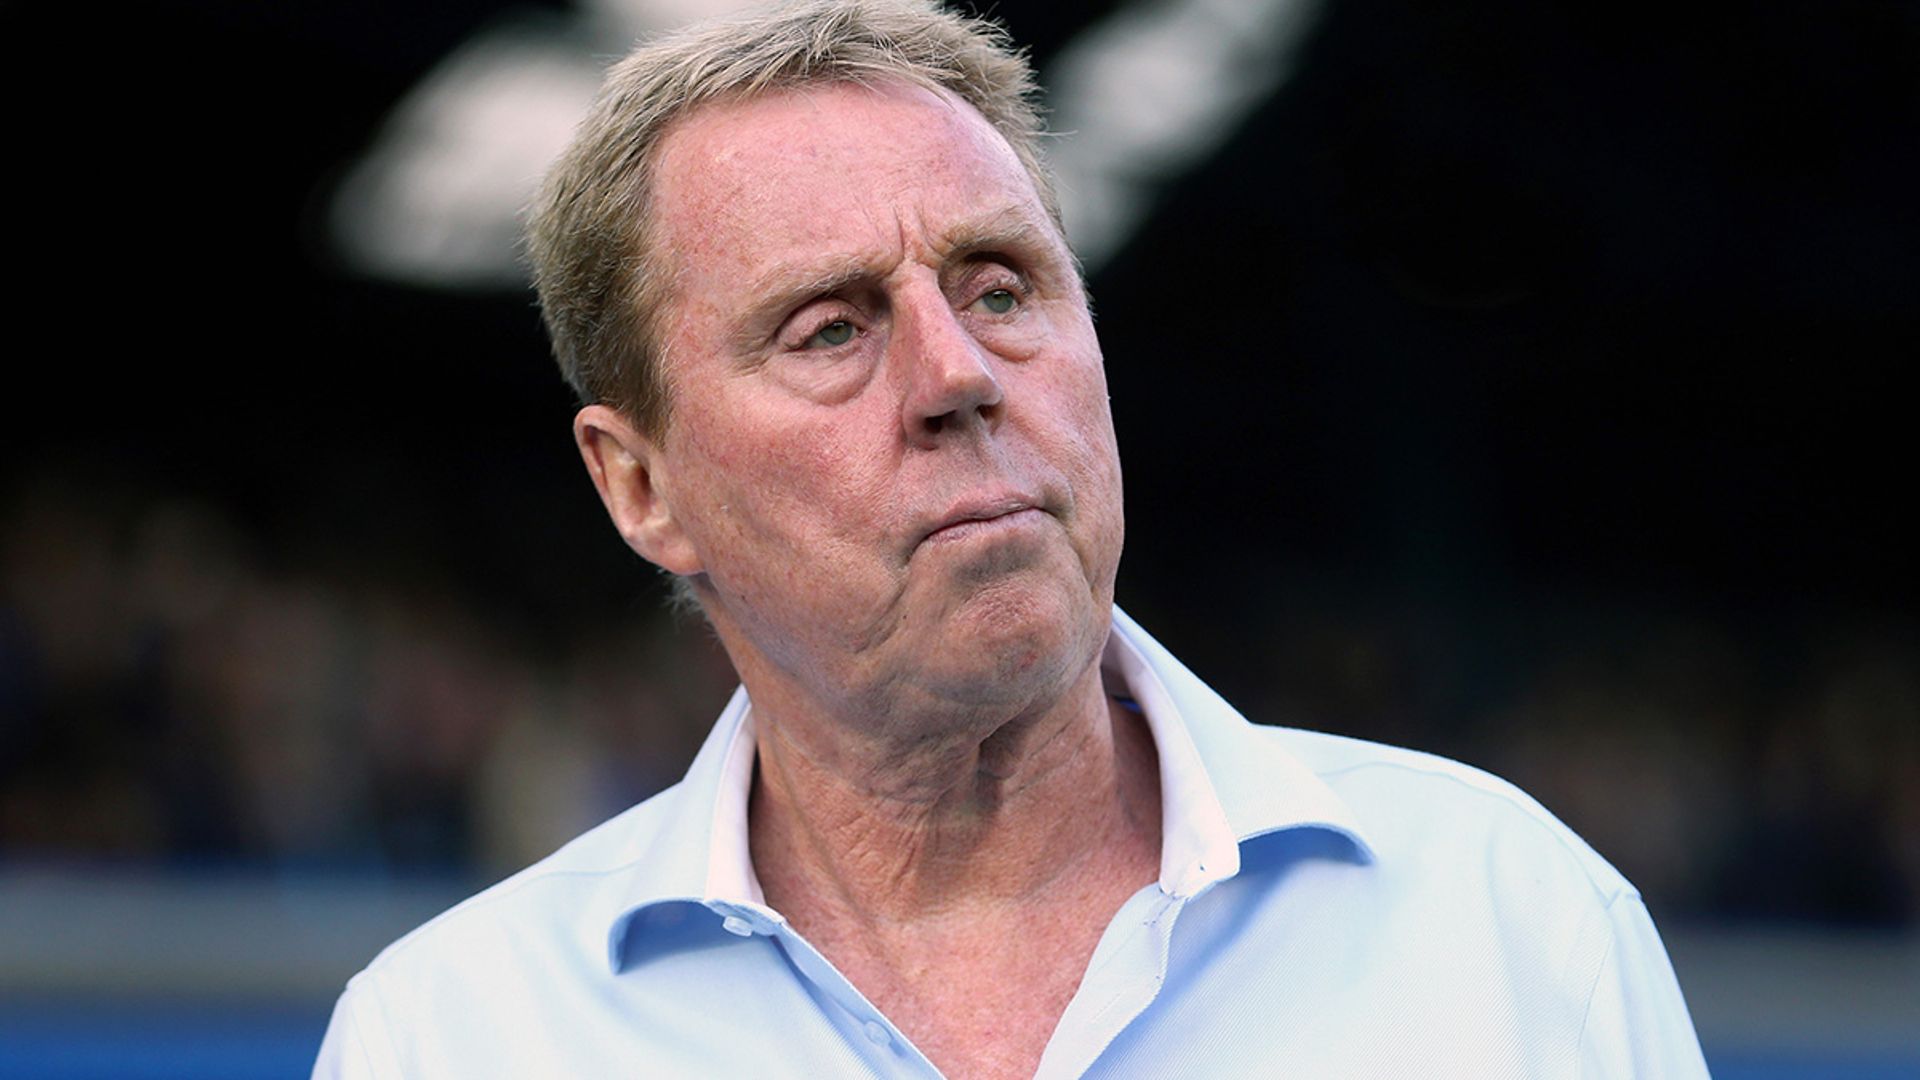 Everything you need to know about Harry Redknapp's family